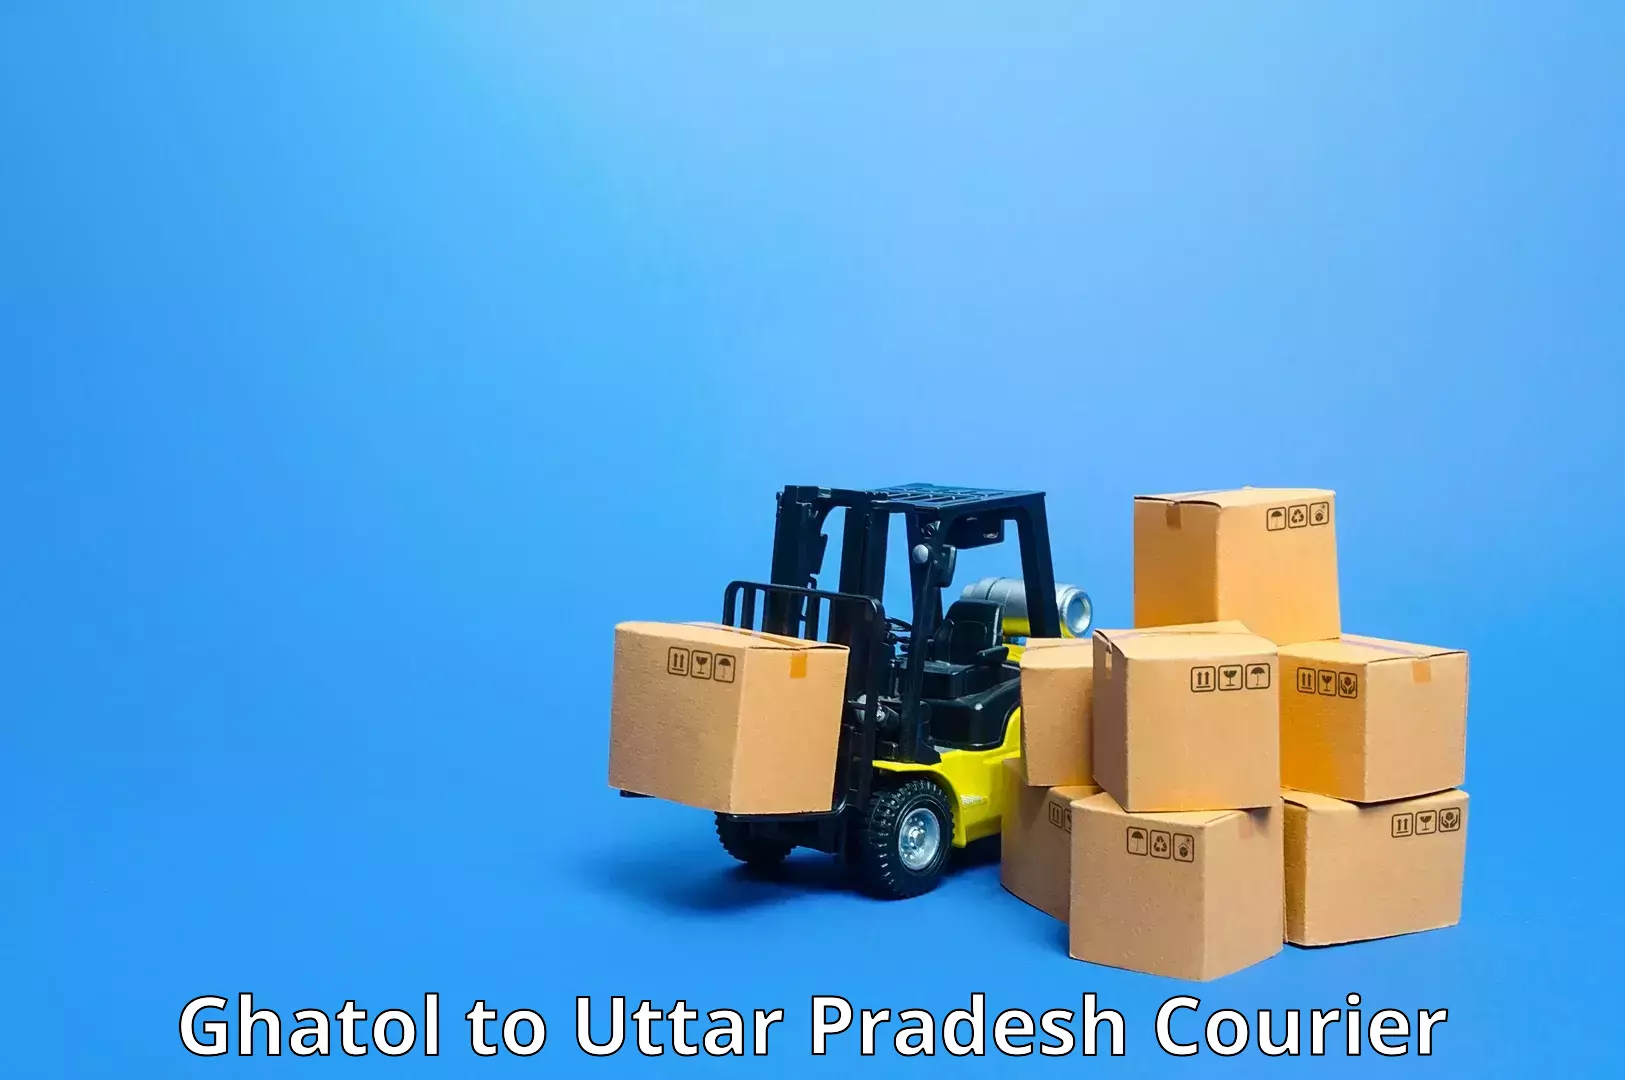 Efficient logistics management in Ghatol to Agra